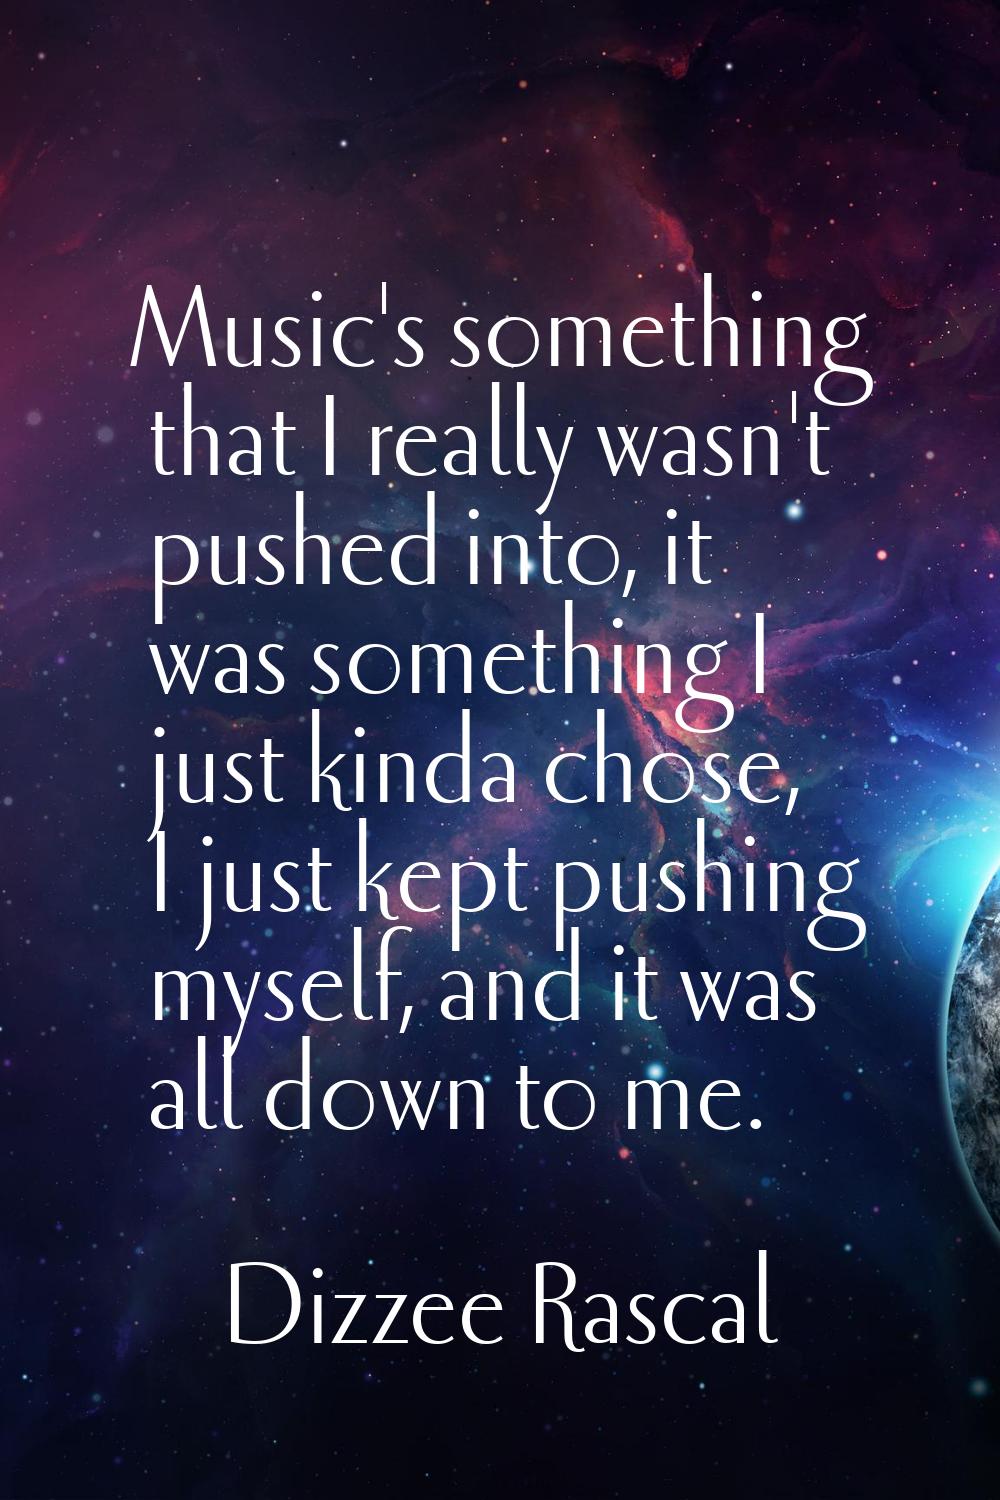 Music's something that I really wasn't pushed into, it was something I just kinda chose, I just kep